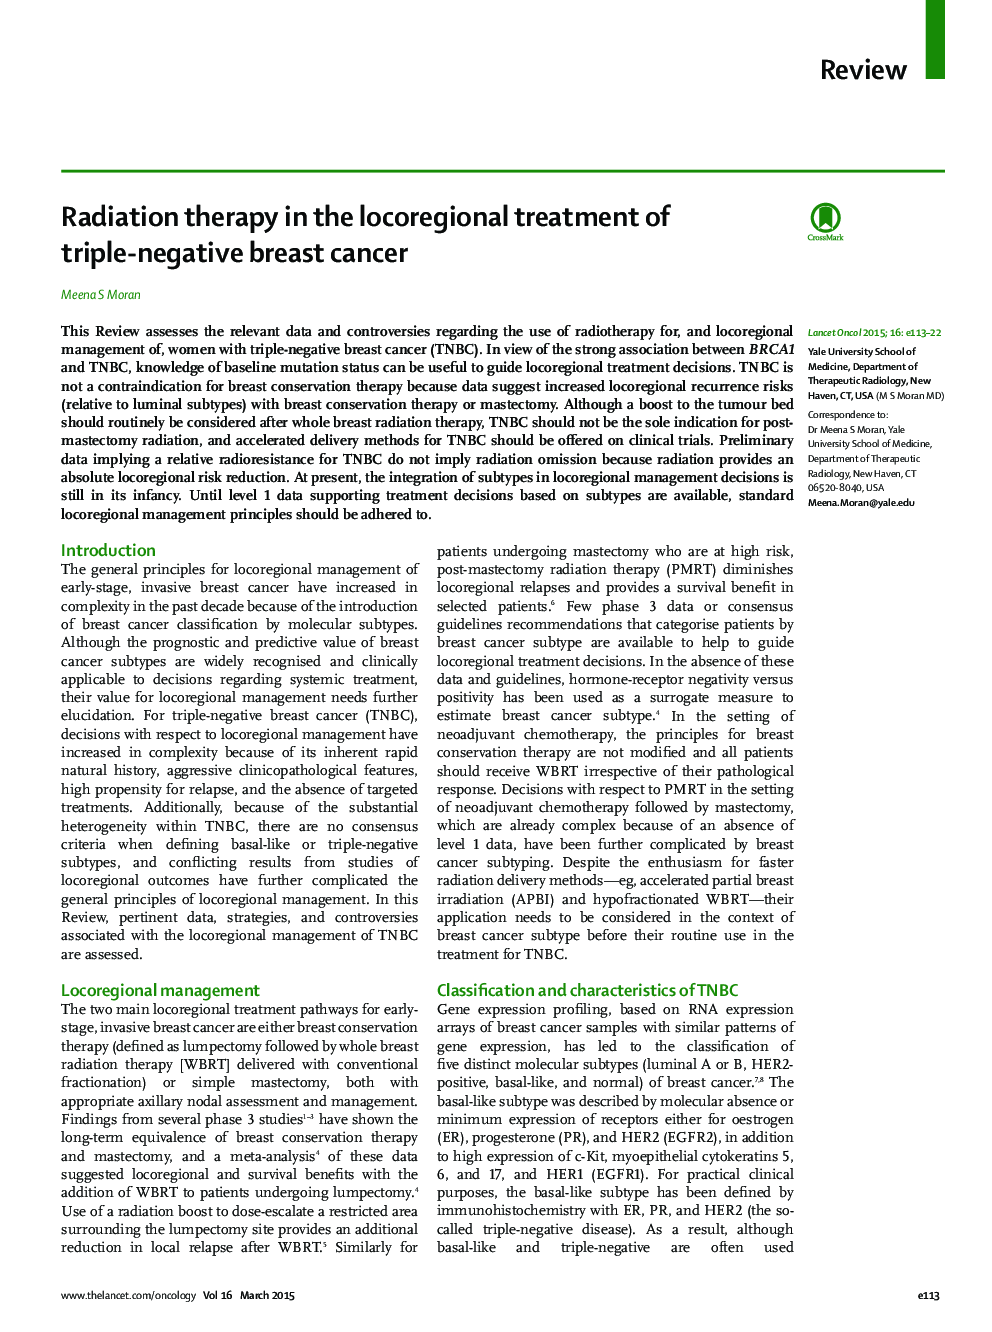 Radiation therapy in the locoregional treatment of triple-negative breast cancer